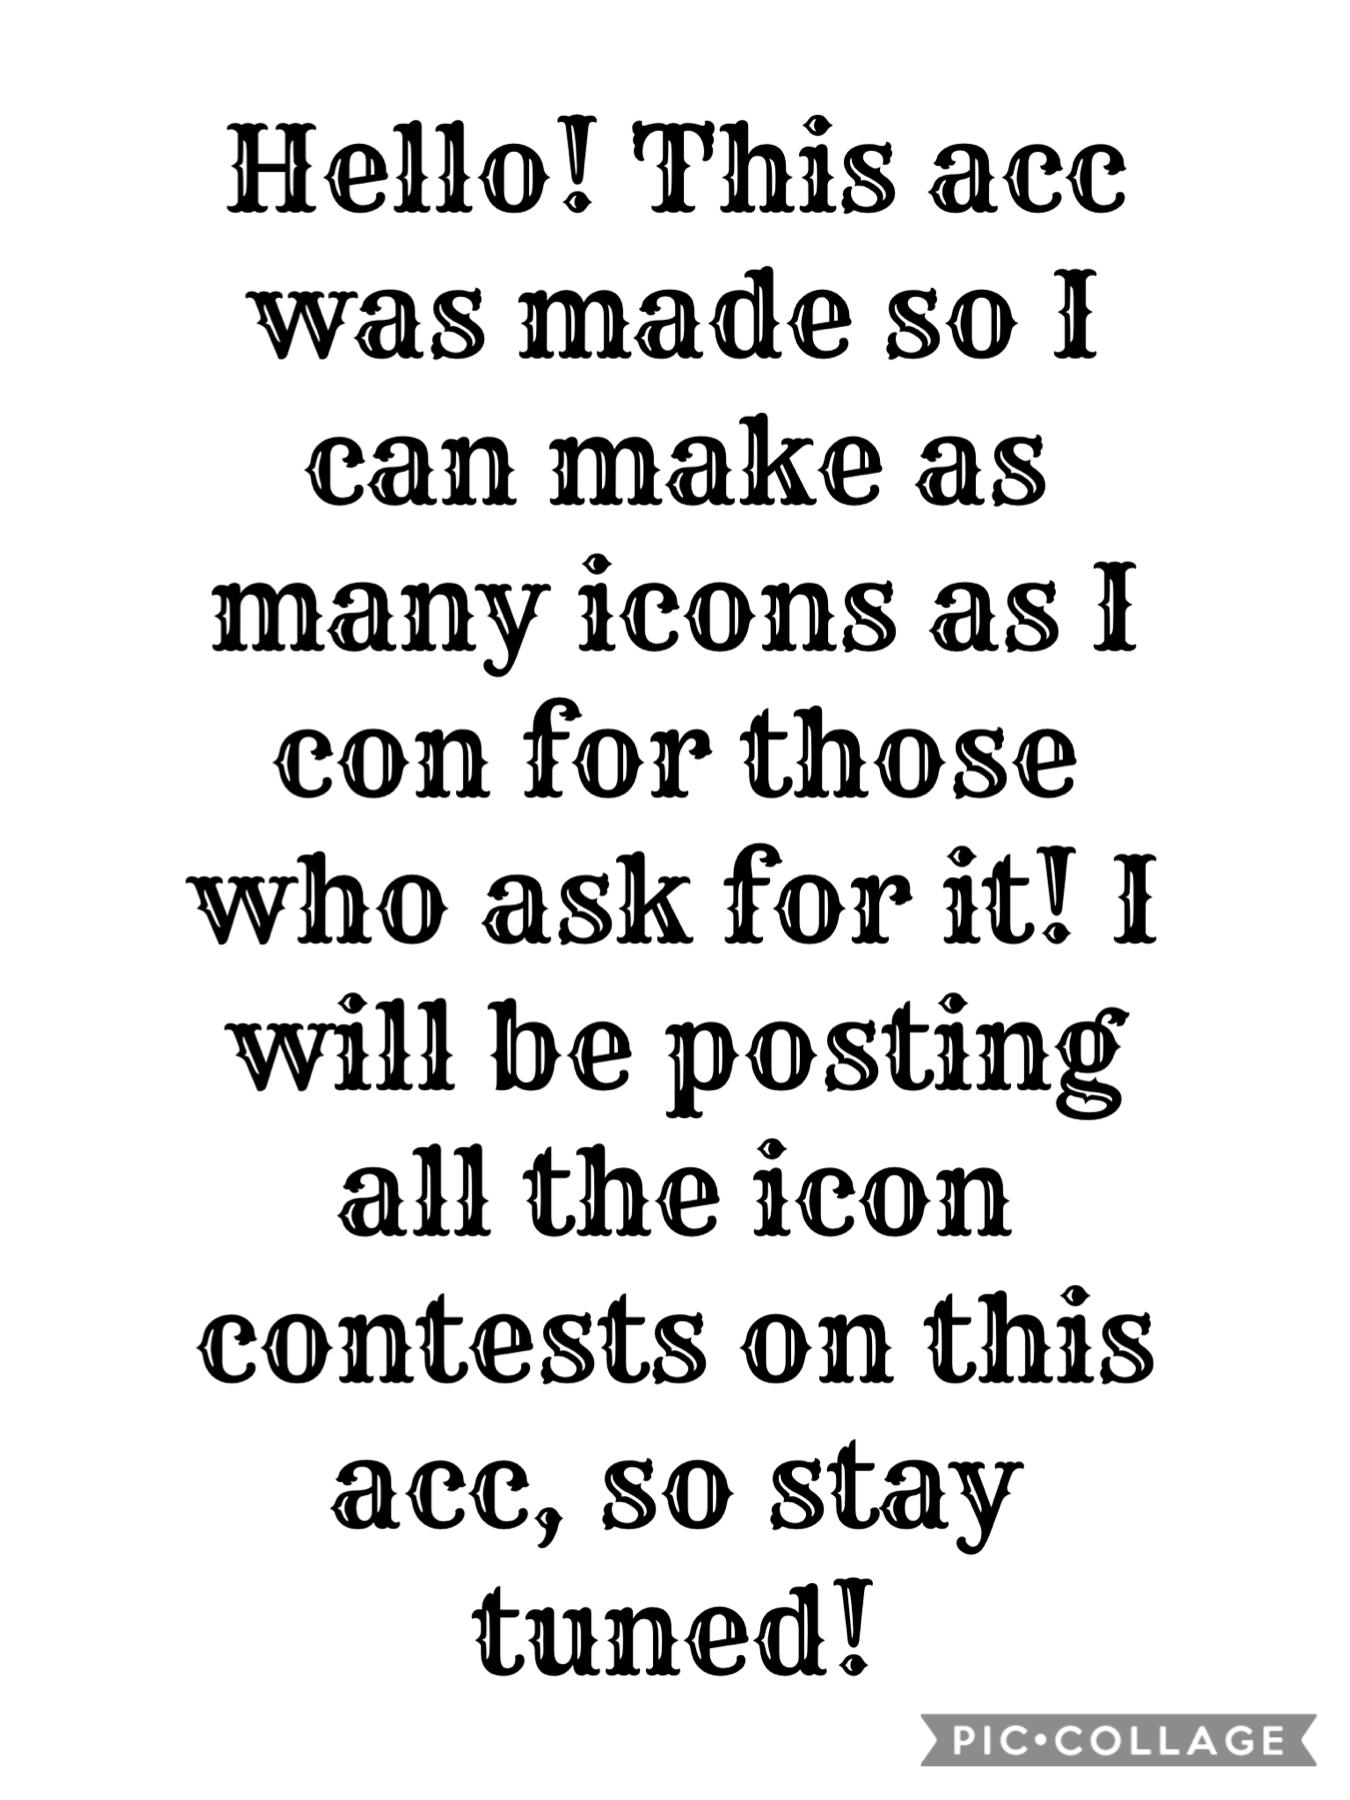 Comment if u have an icon contest!